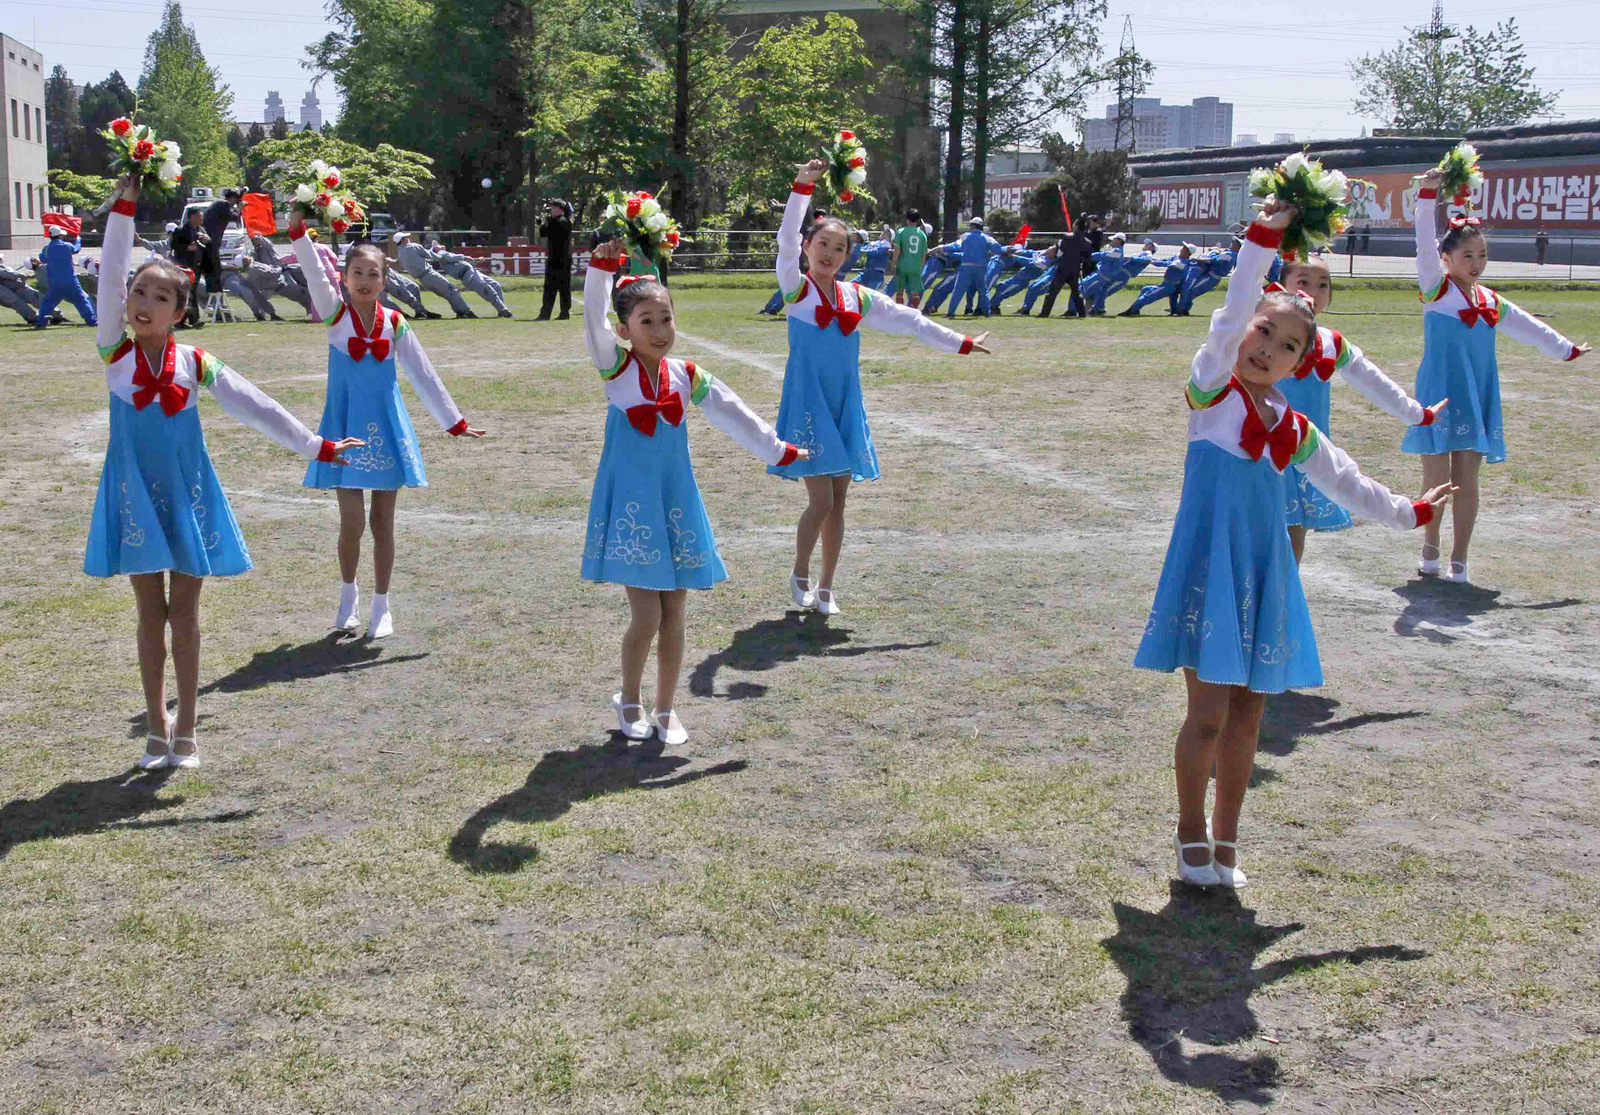 North Korean children perform at a celebration of May Day at the Pyongyang Thermal Power Complex in Pyongyang, North Korea, Monday, May 1, 2017. International Workers' Day, which is also known as Labor Day in some countries, is being celebrated worldwide. 